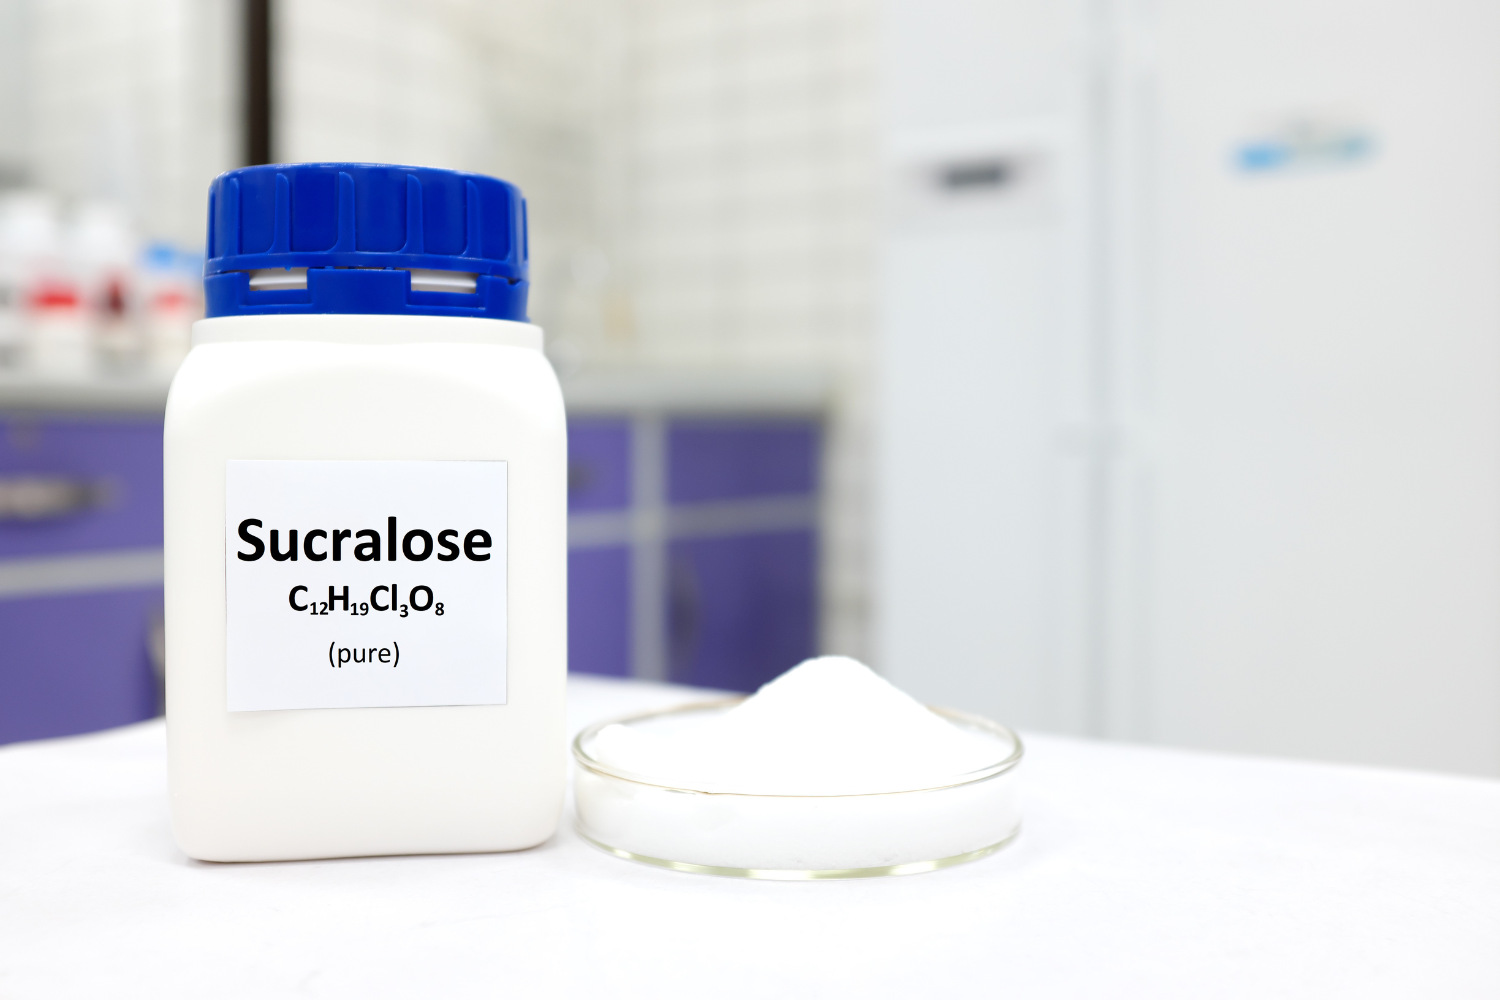 is sucralose bad for you?